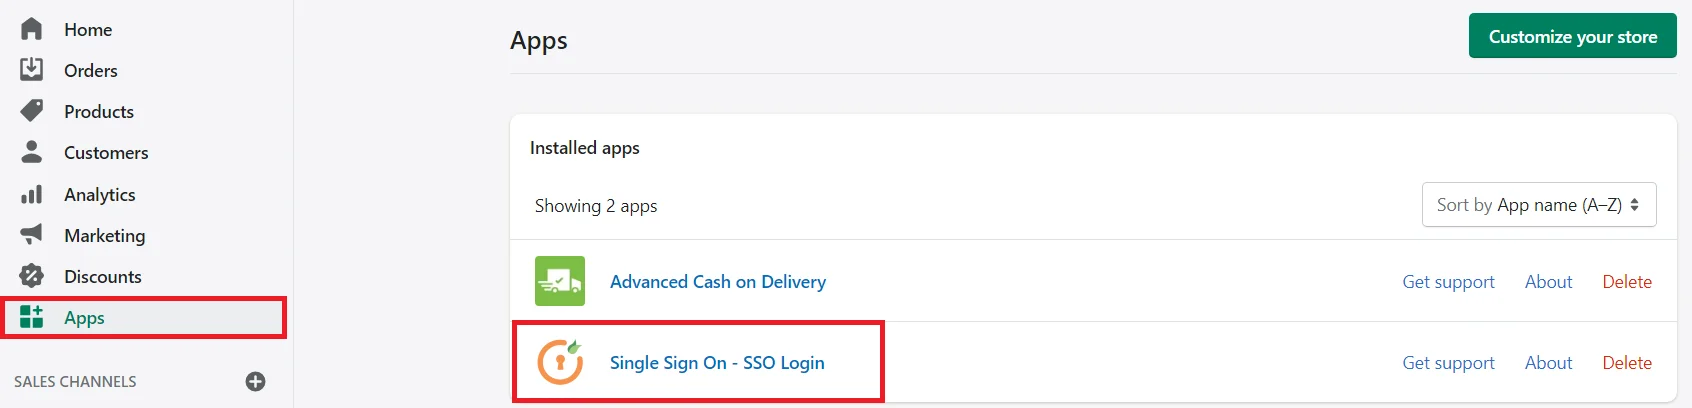 Shopify Single Sign-On (SSO)  - Shopify Plus and Non Plus Stores, Configure Identity Provider (IDP) for enabling Single Sign-On (SSO)